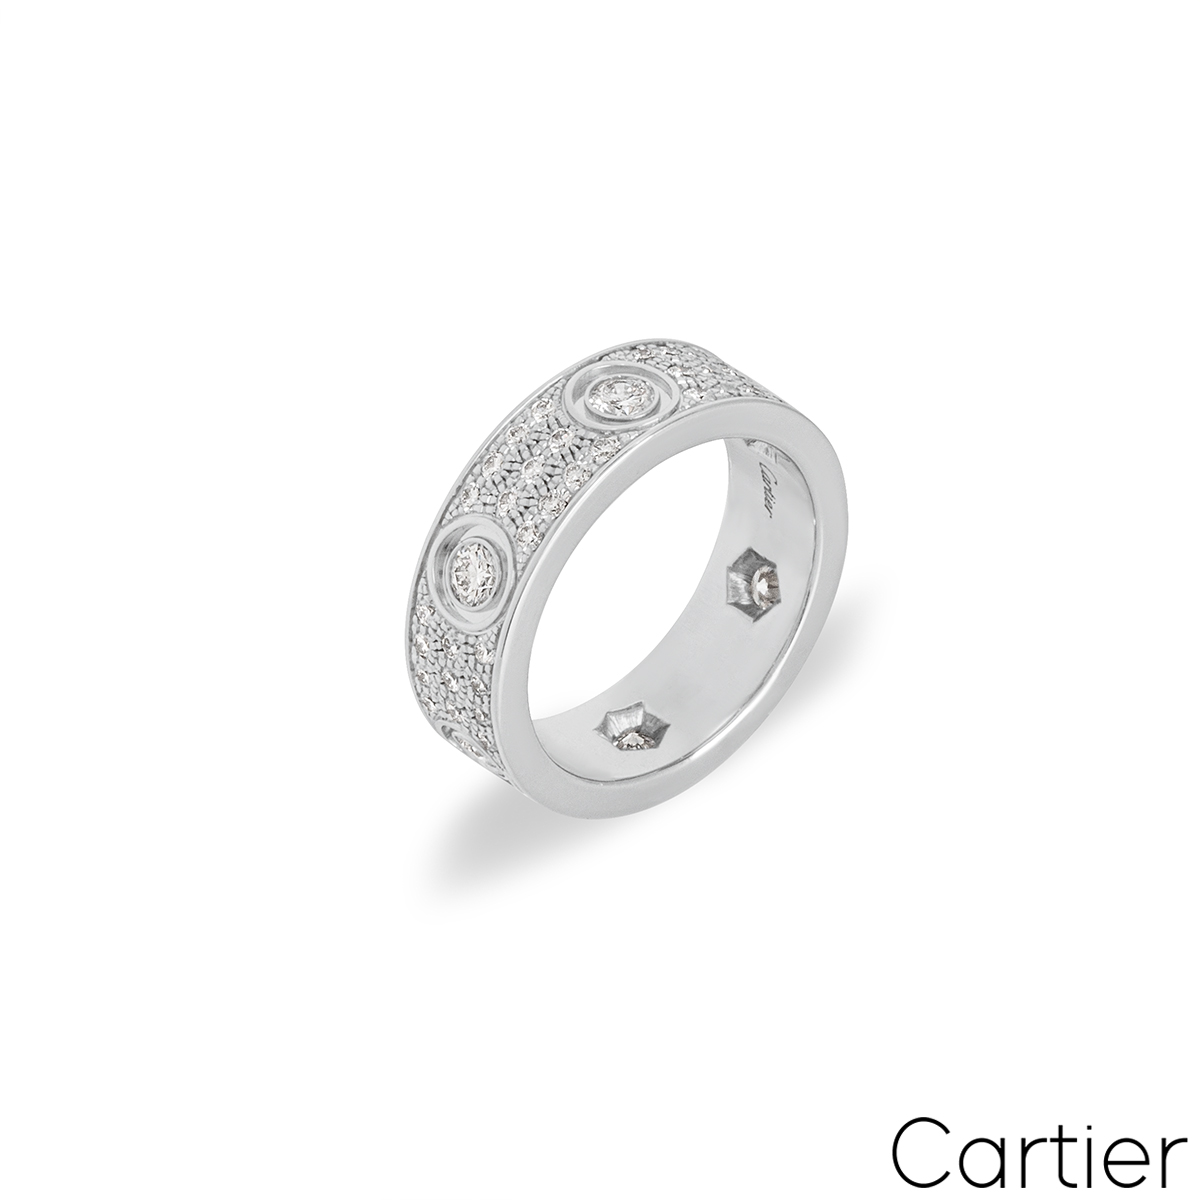 Cartier White Gold Pave Diamond Love Ring N4210400